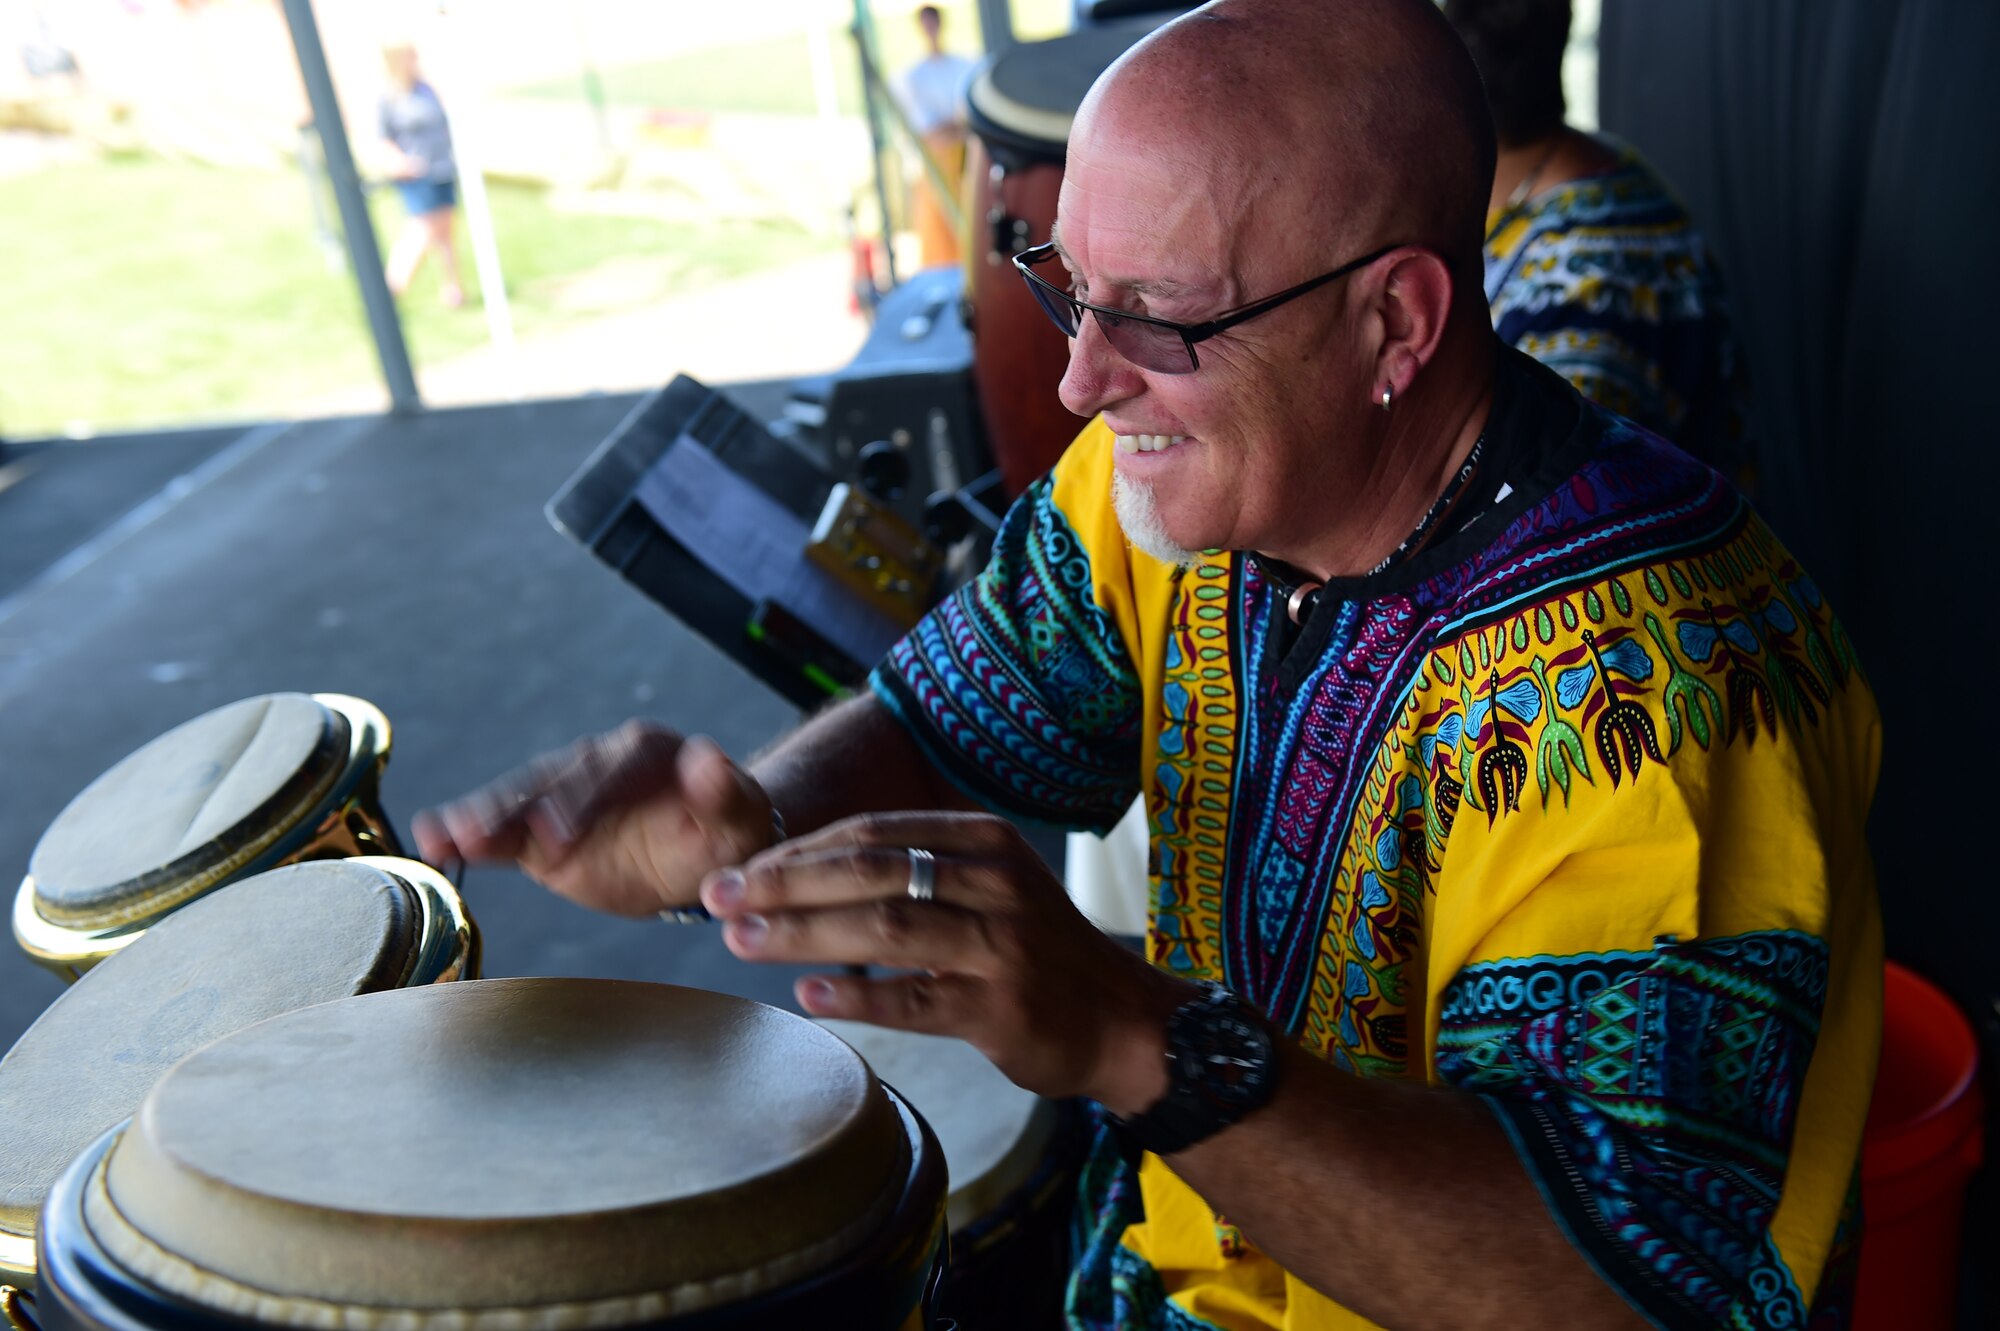 A drummer from the World Dance Show performs July 15, 2016, during Diversity Day on Buckley Air Force Base, Colo. Diversity Day provided an opportunity to explore and celebrate the accomplishments and cultures of a diverse military force, which included food, dancing and music from various cultures. (U.S. Air Force photo by Airman 1st Class Gabrielle Spradling/Released)